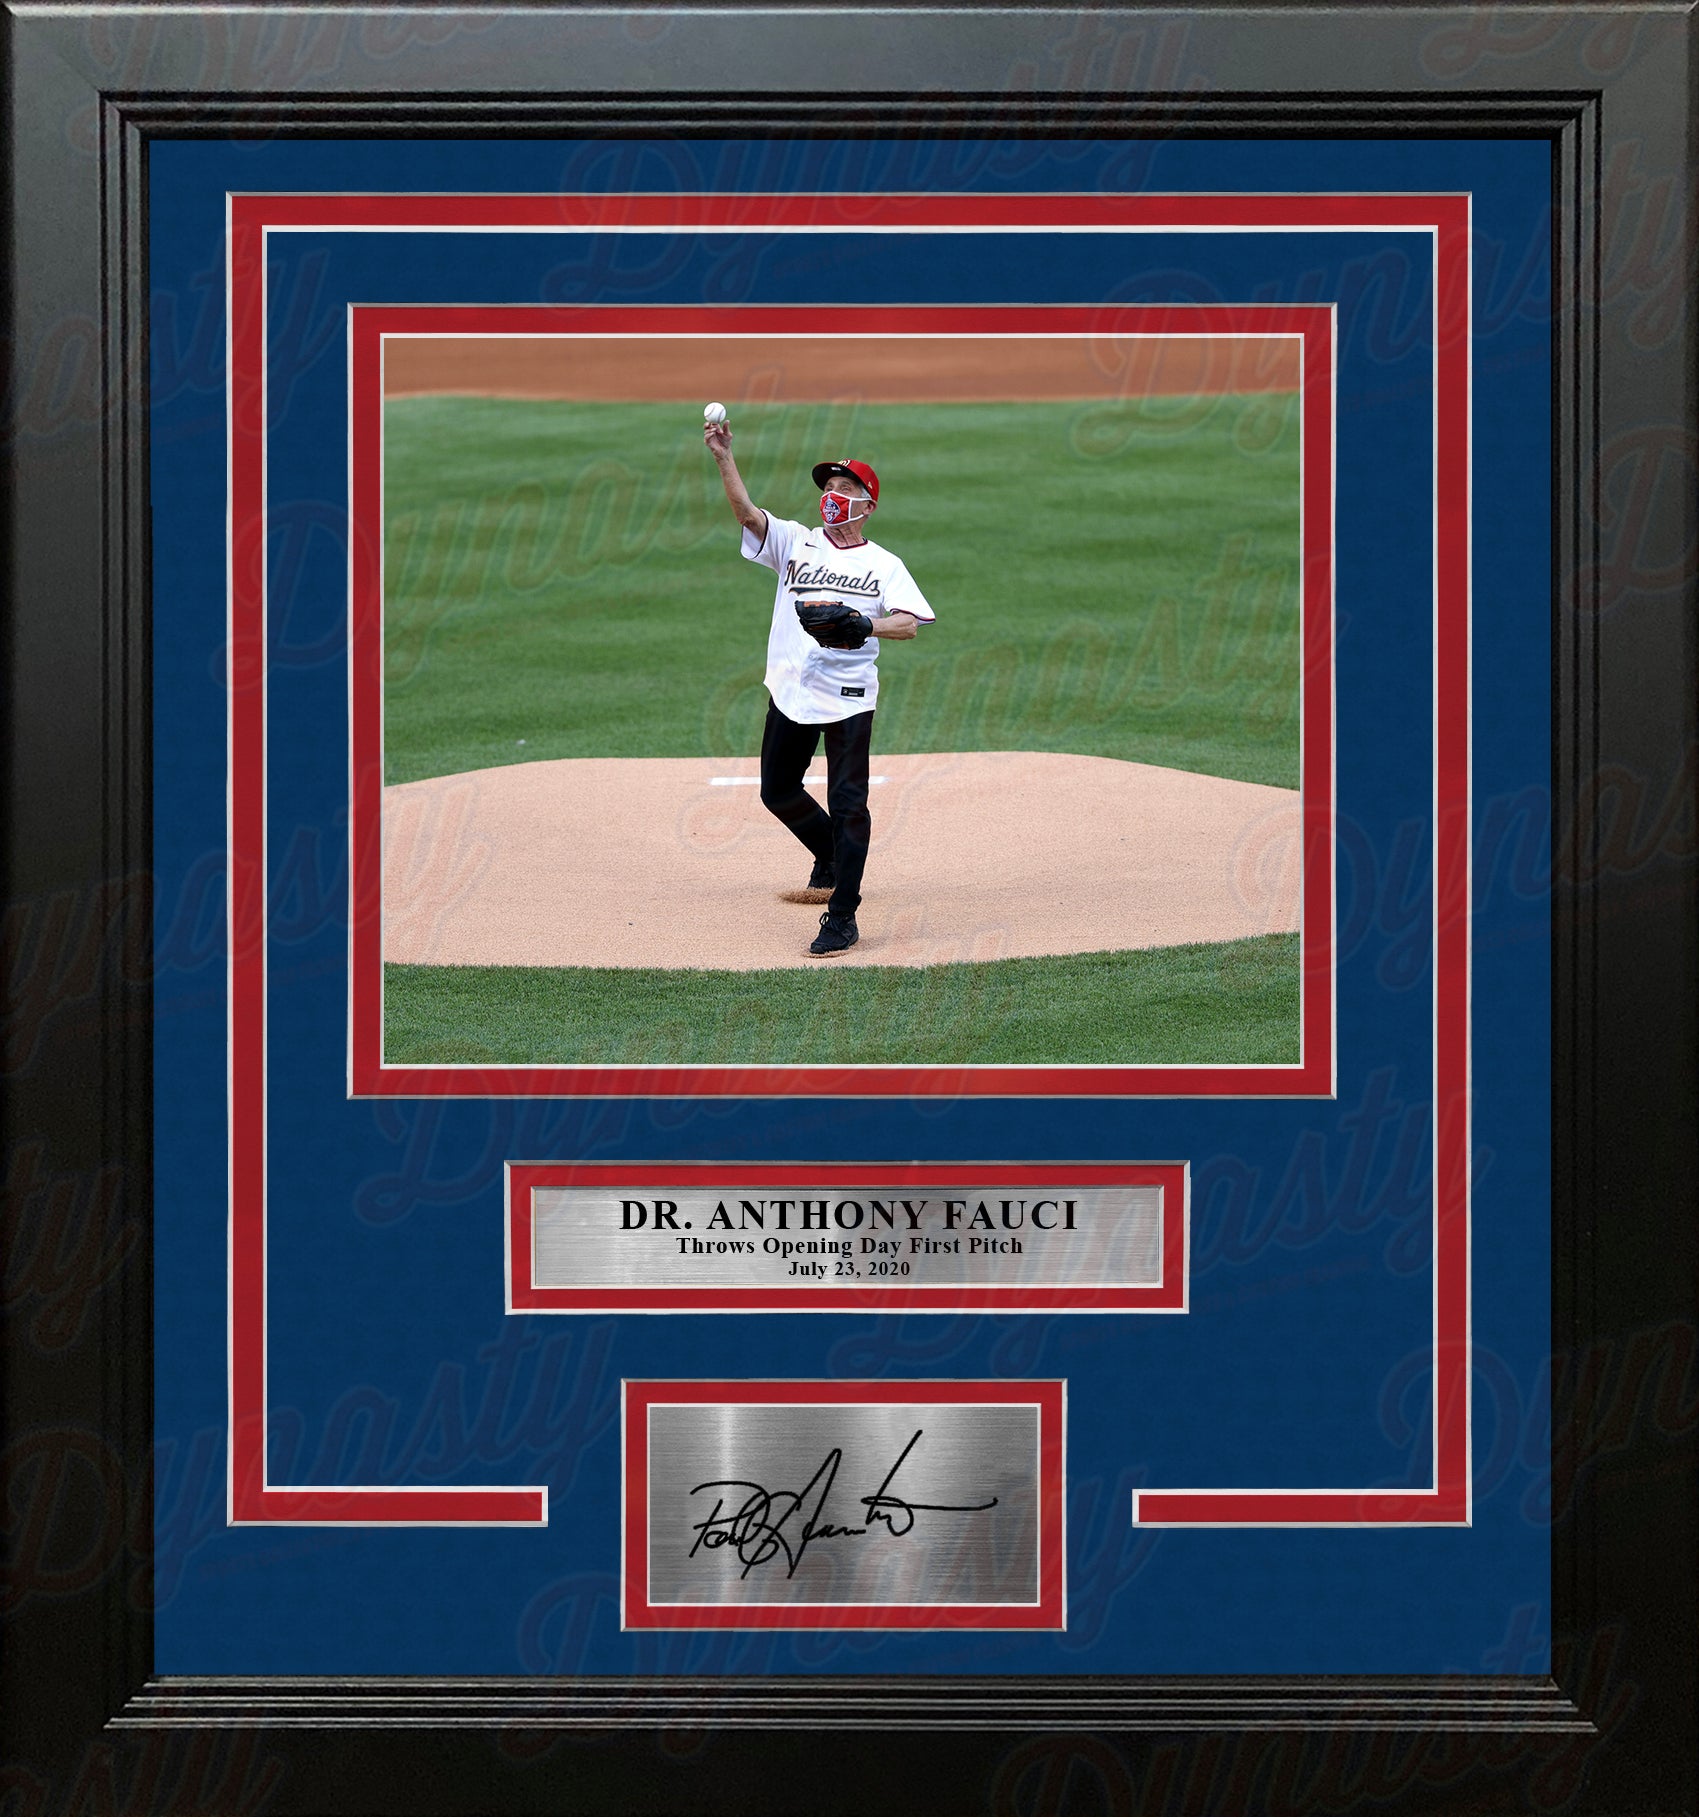 Dr. Anthony Fauci 2020 Washington Nationals First Pitch 8x10 Framed Photo with Engraved Autograph - Dynasty Sports & Framing 